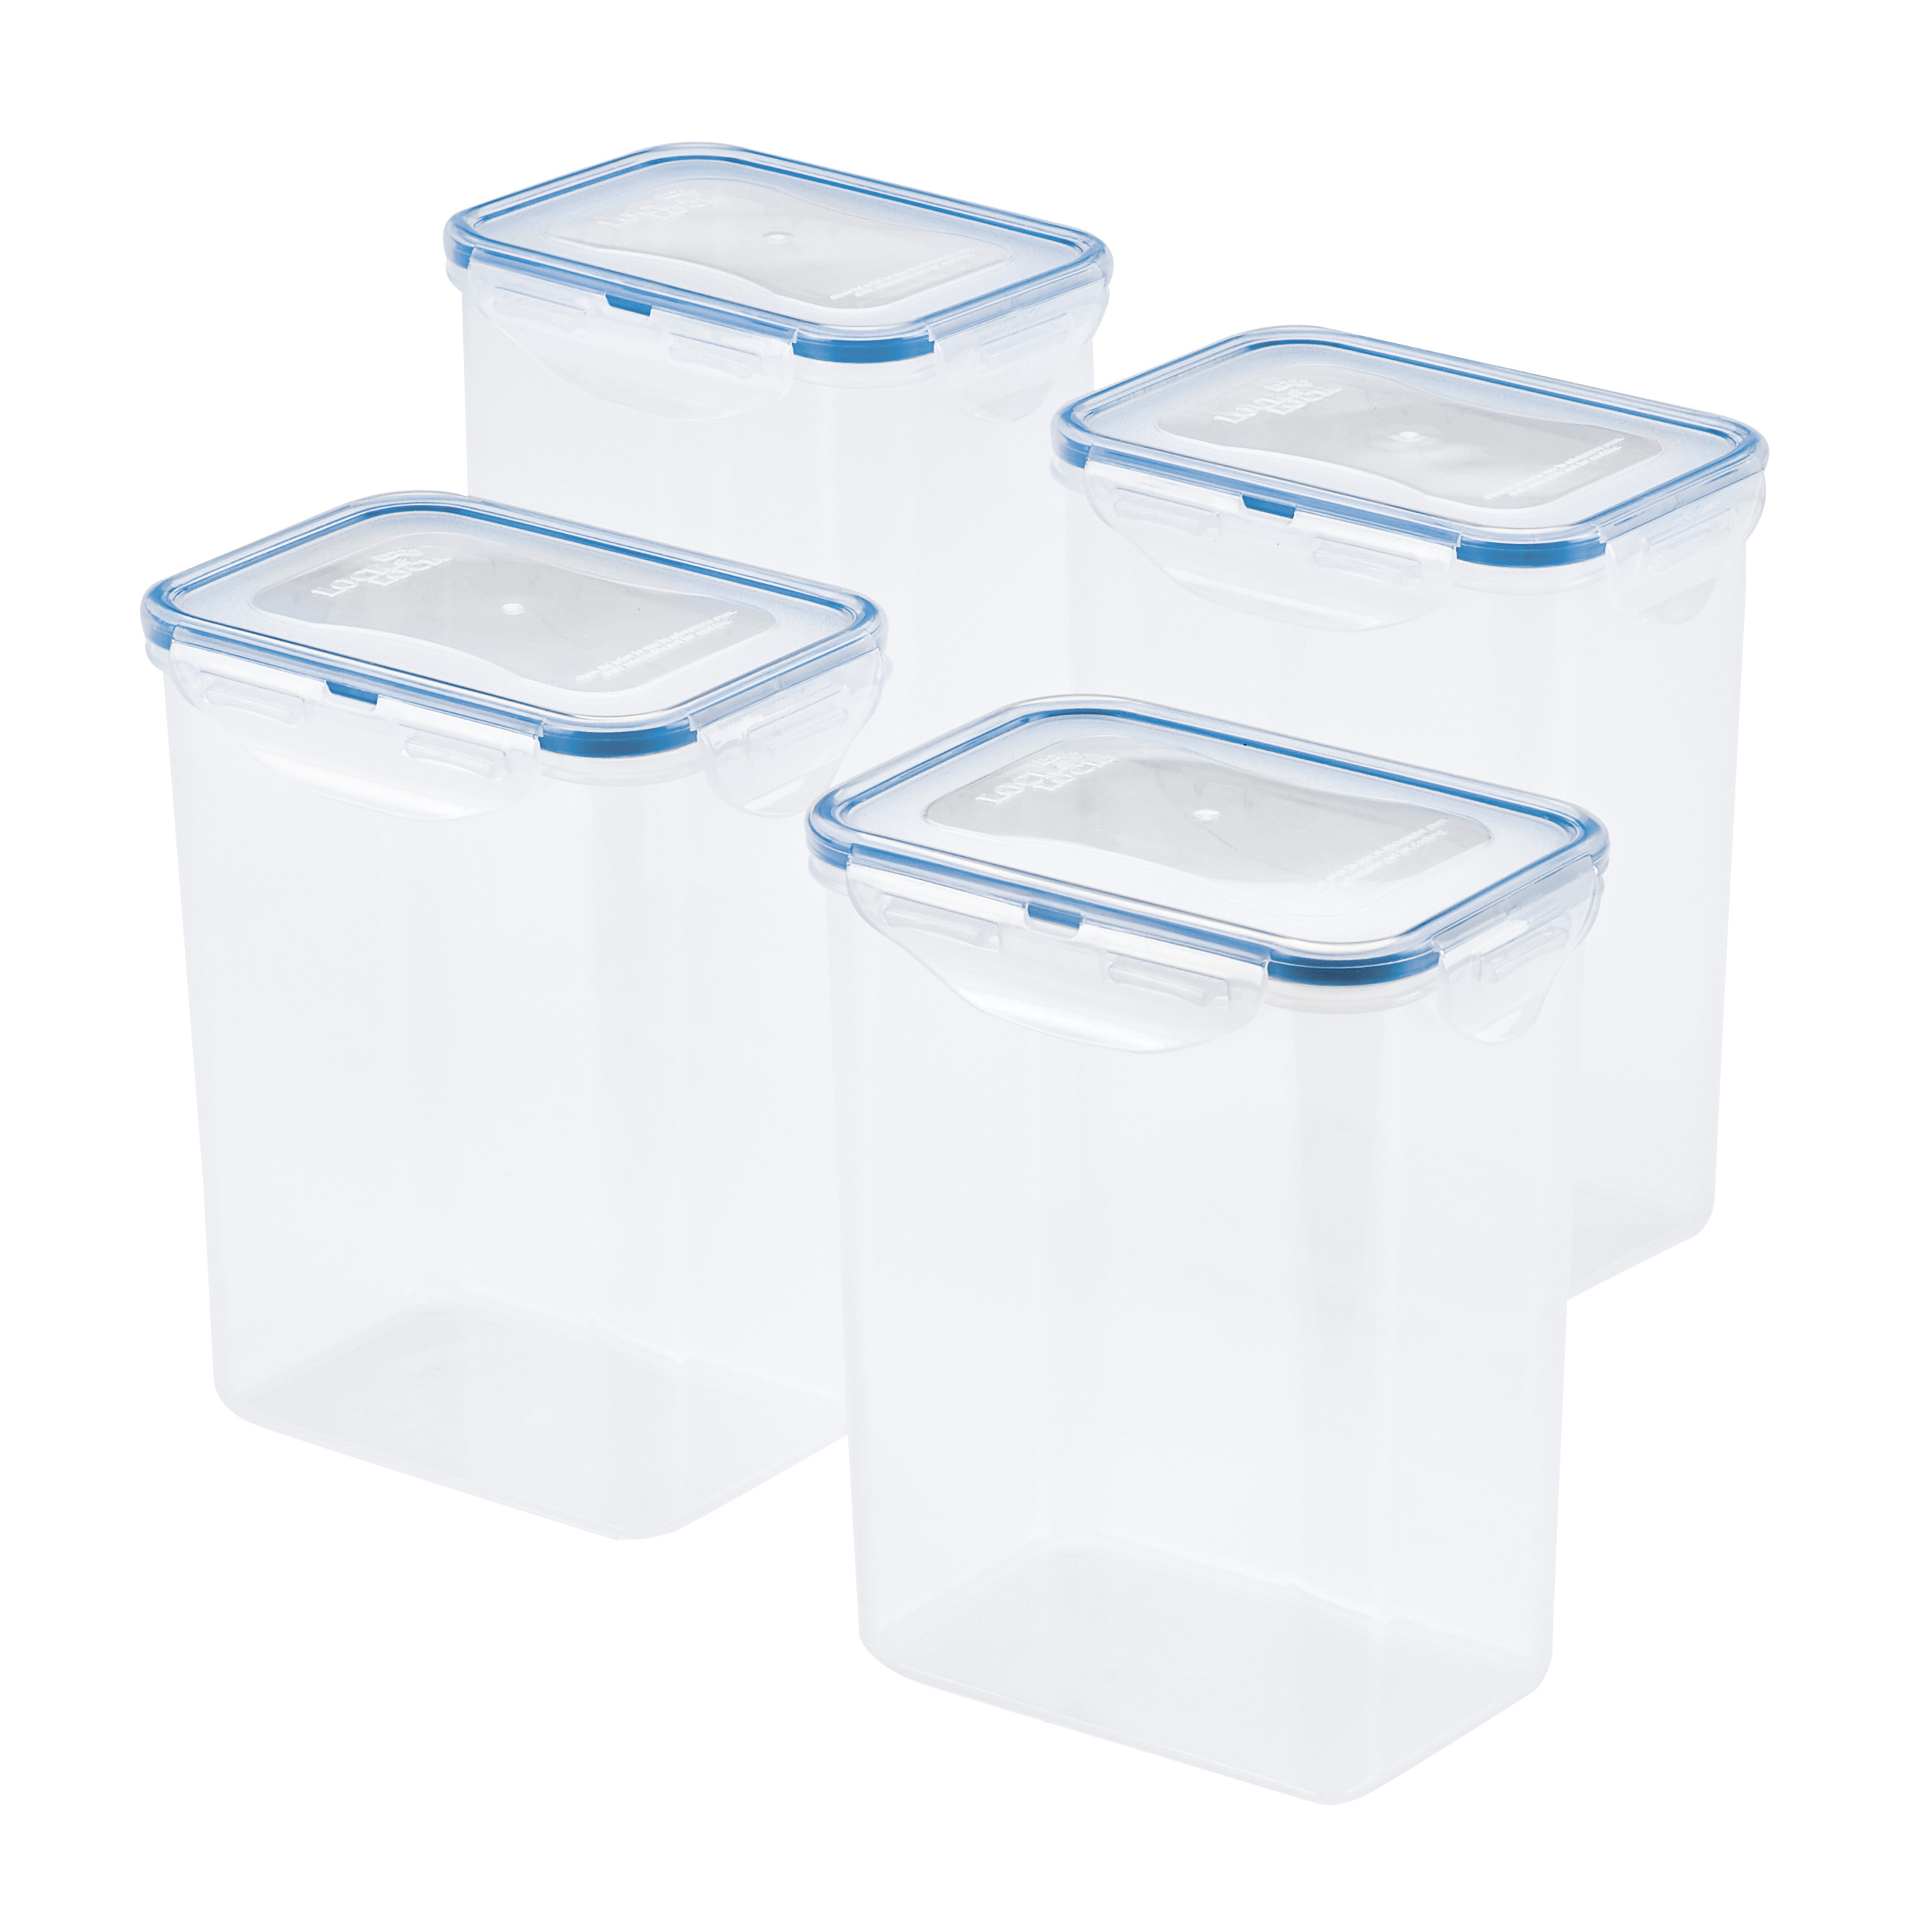 LocknLock Pantry 7.6-Cup Rectangular Food Storage Container, Set of 4 - image 1 of 3